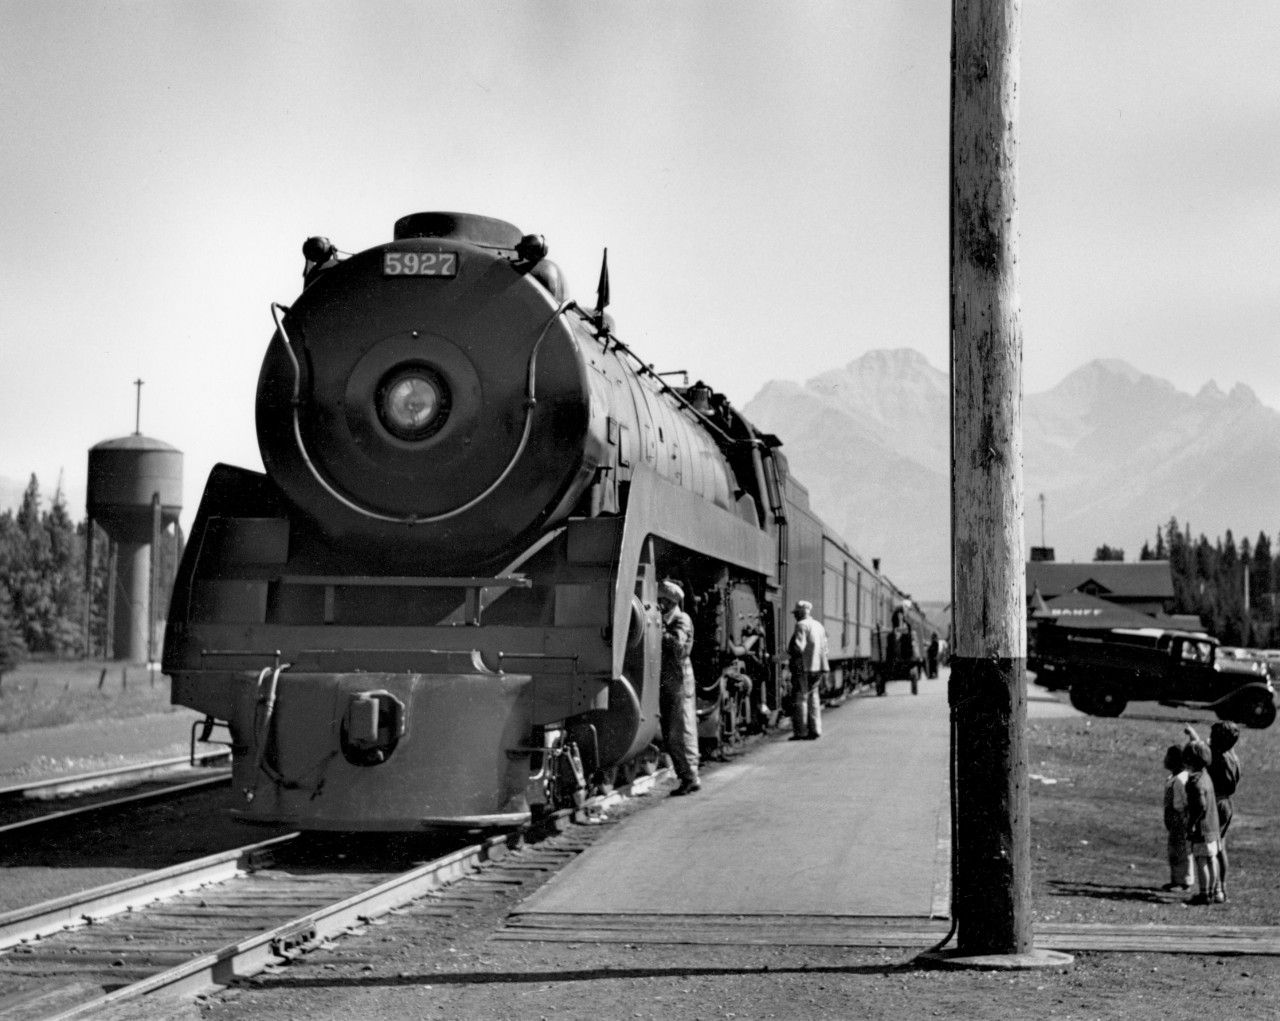 5927 on second section of train no. 3 at Banff station.